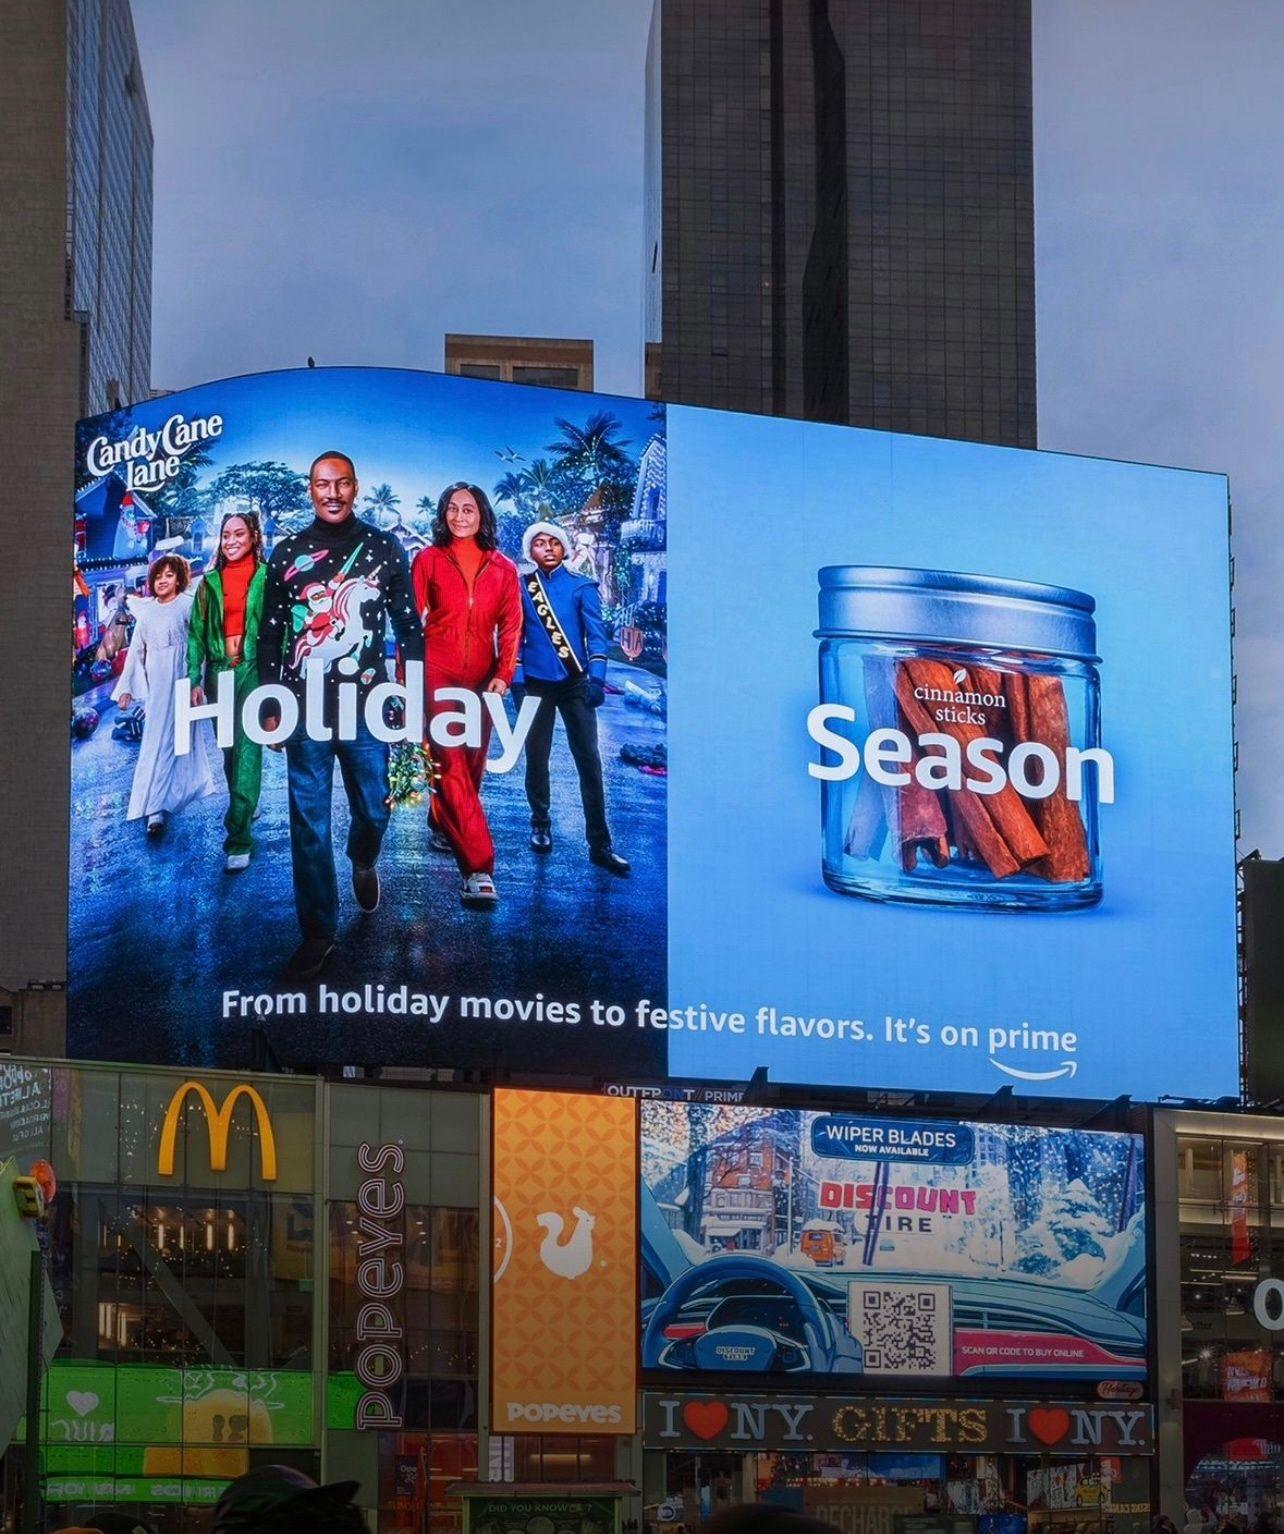 Amazon Prime billboard, 'It's On Prime' out-of-home campaign